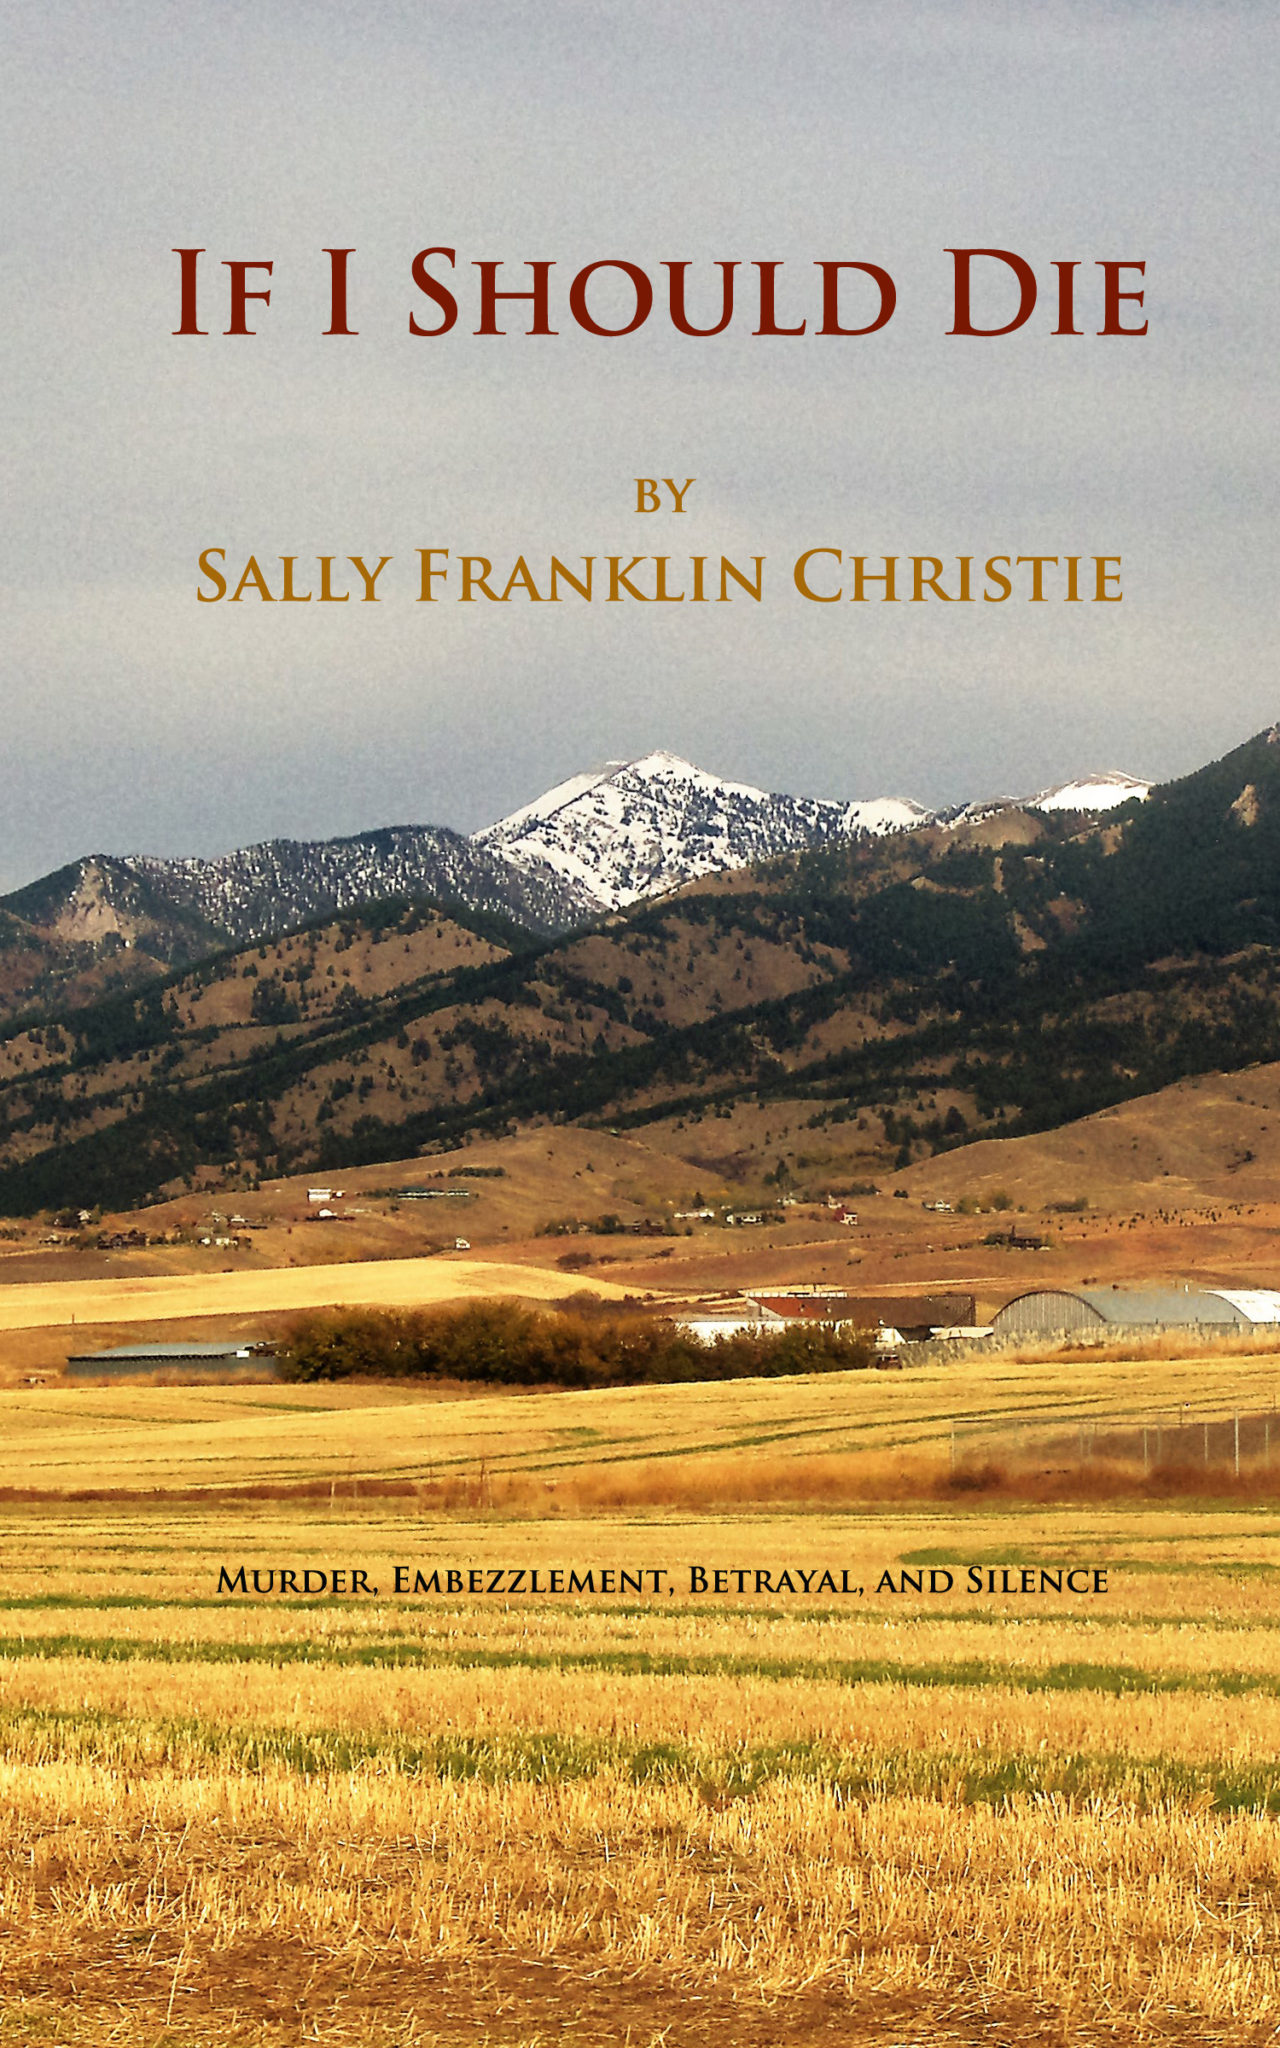 FREE: If I Should Die: Murder, Embezzlement, Betrayal and Silence by Sally Franklin Christie